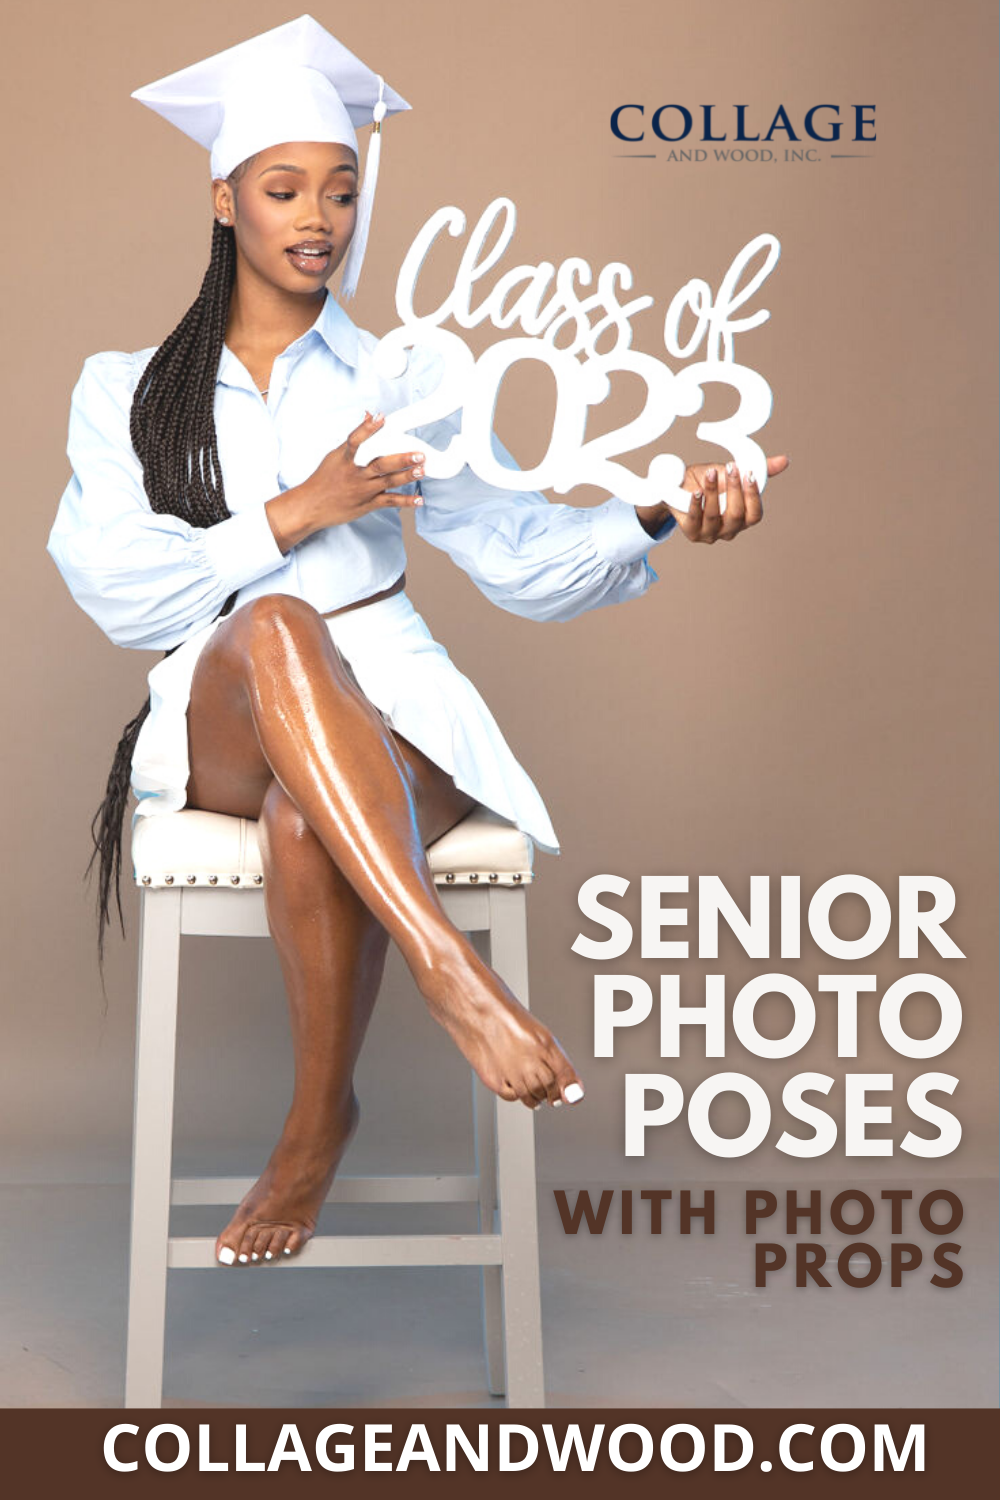 This article is for you if you're looking for senior picture ideas - take amazing photos like this young lady with our class of 2023 sign!